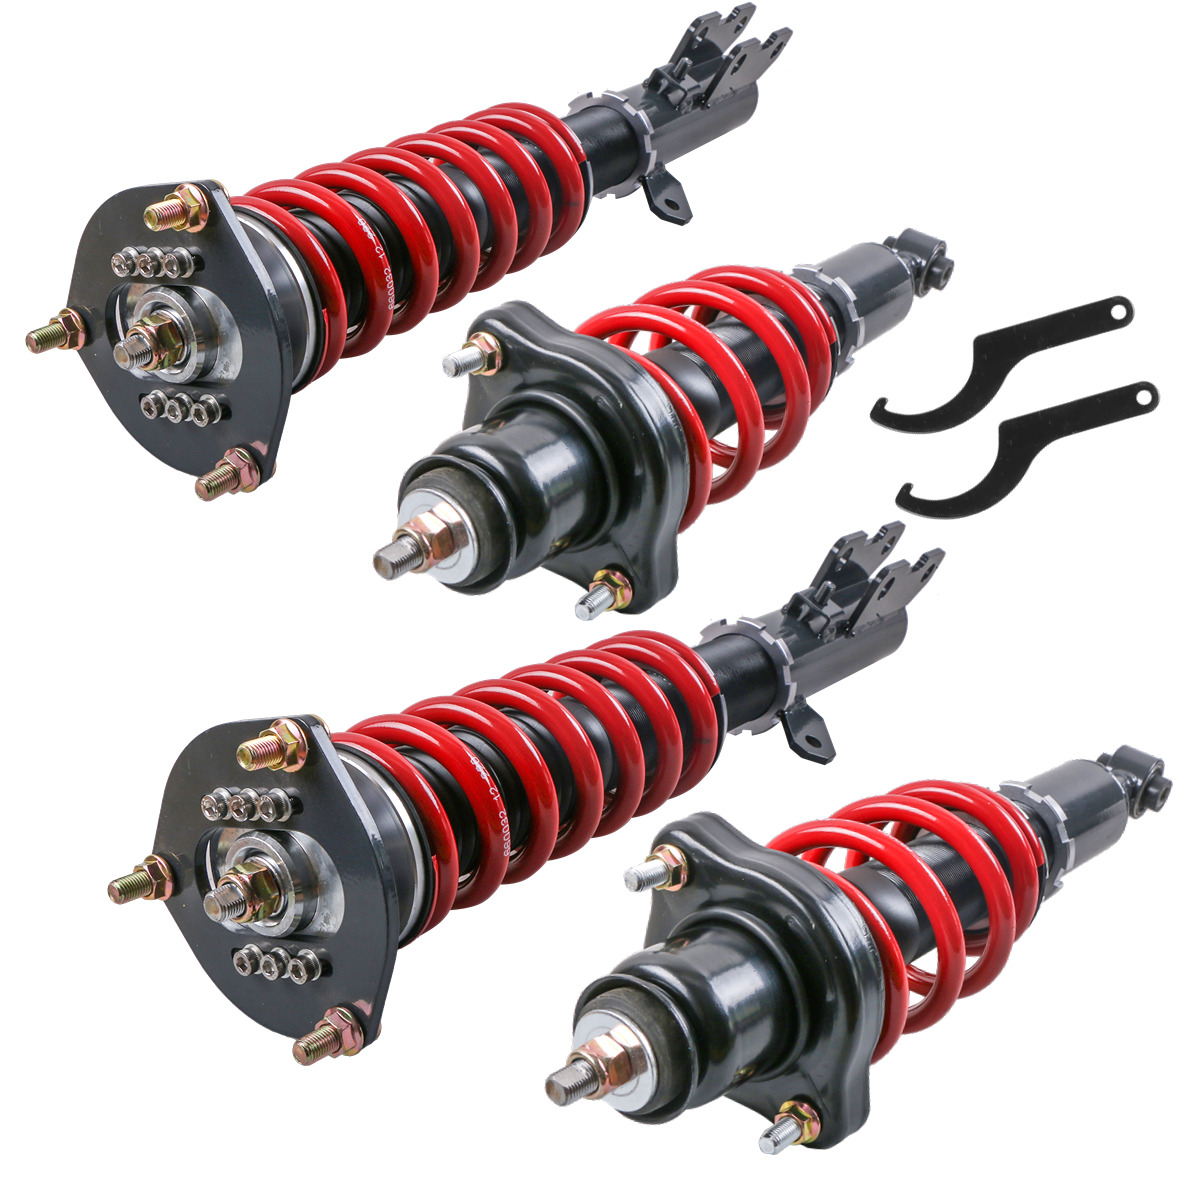 Set(4) Coilovers Struts For 2008-2016 Mitsubishi Lancer & Ralliart CY2A/CZ4A